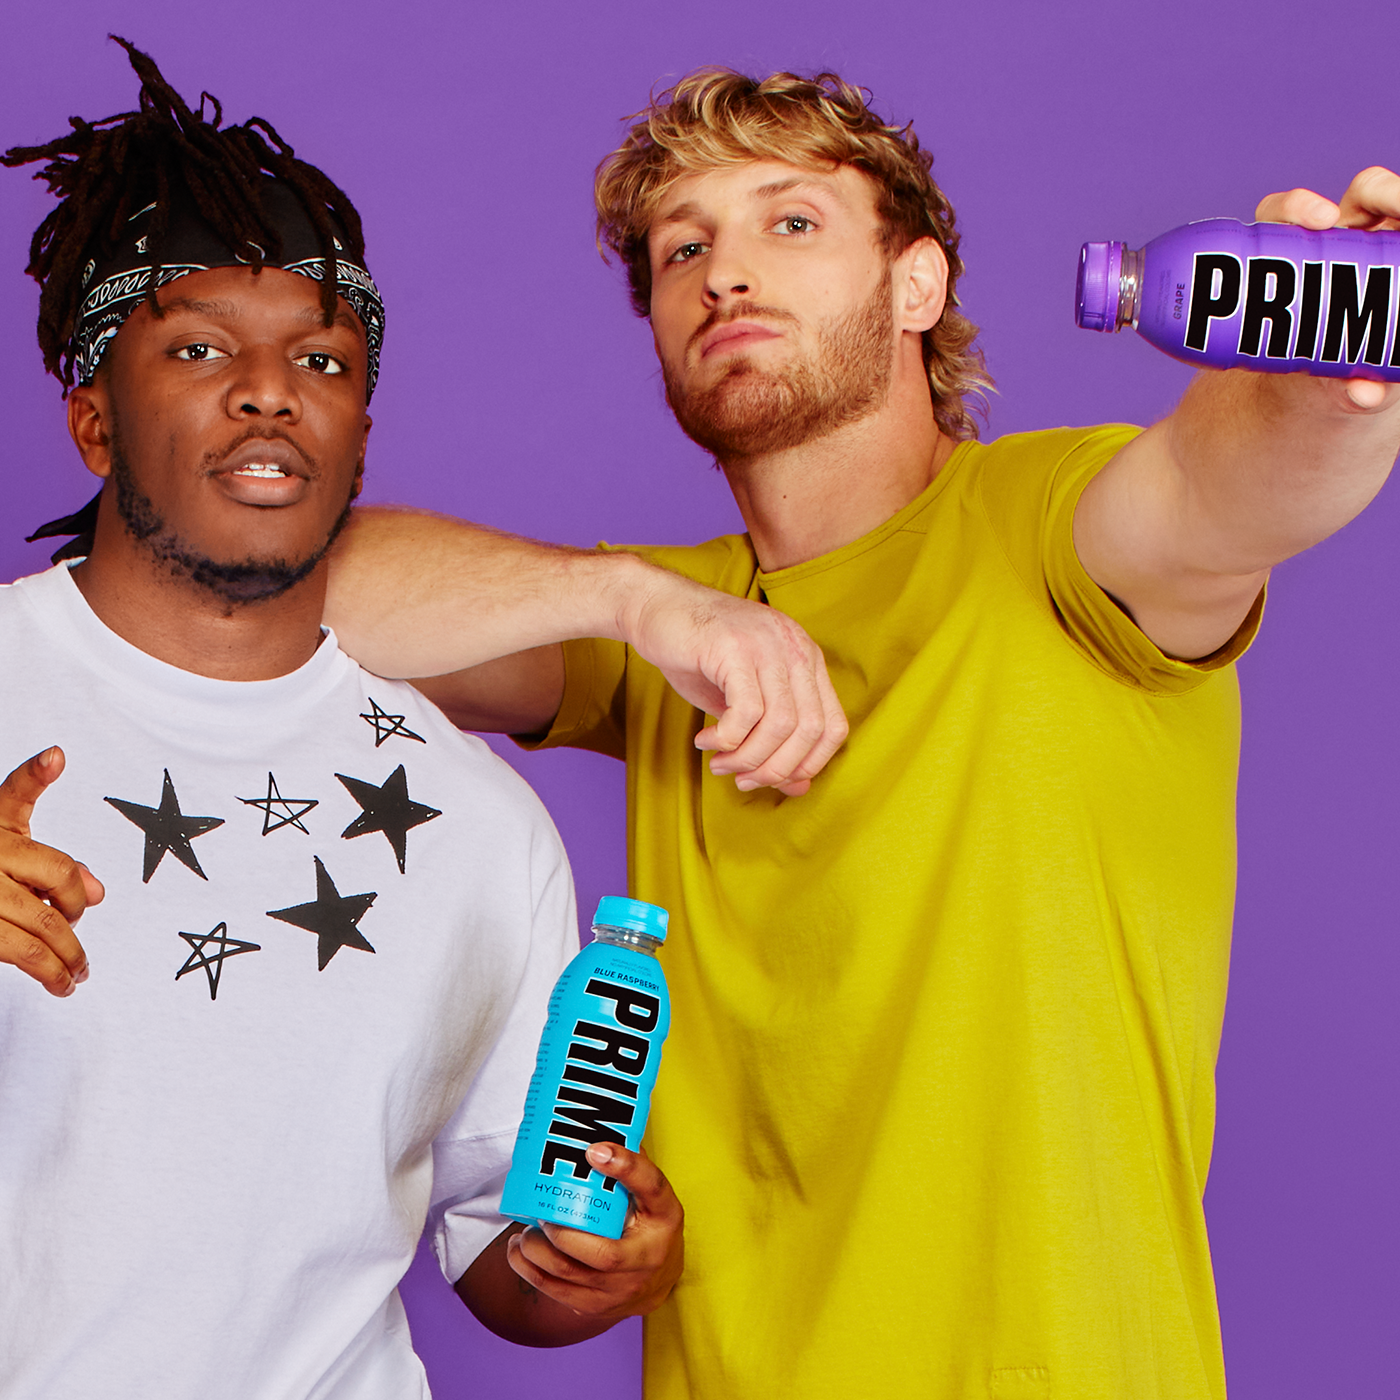 KSI and Logan Paul each held a bottle of Prime hydration drink, one in Blue Raspberry and the other in Grape flavor.